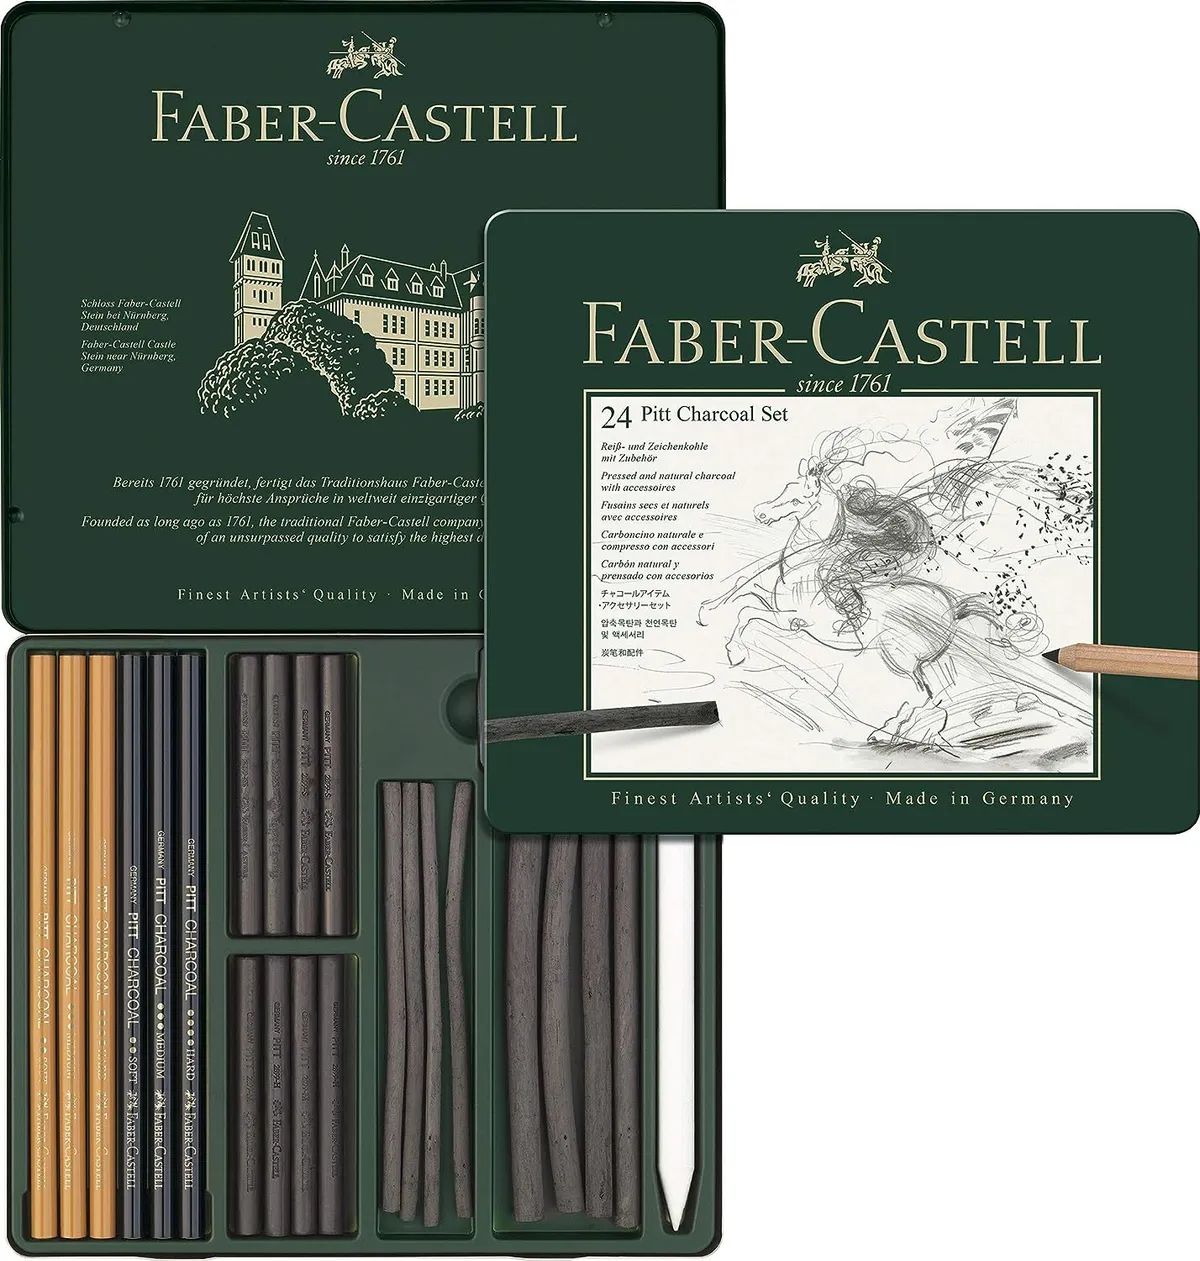 Faber-Castell charcoal set